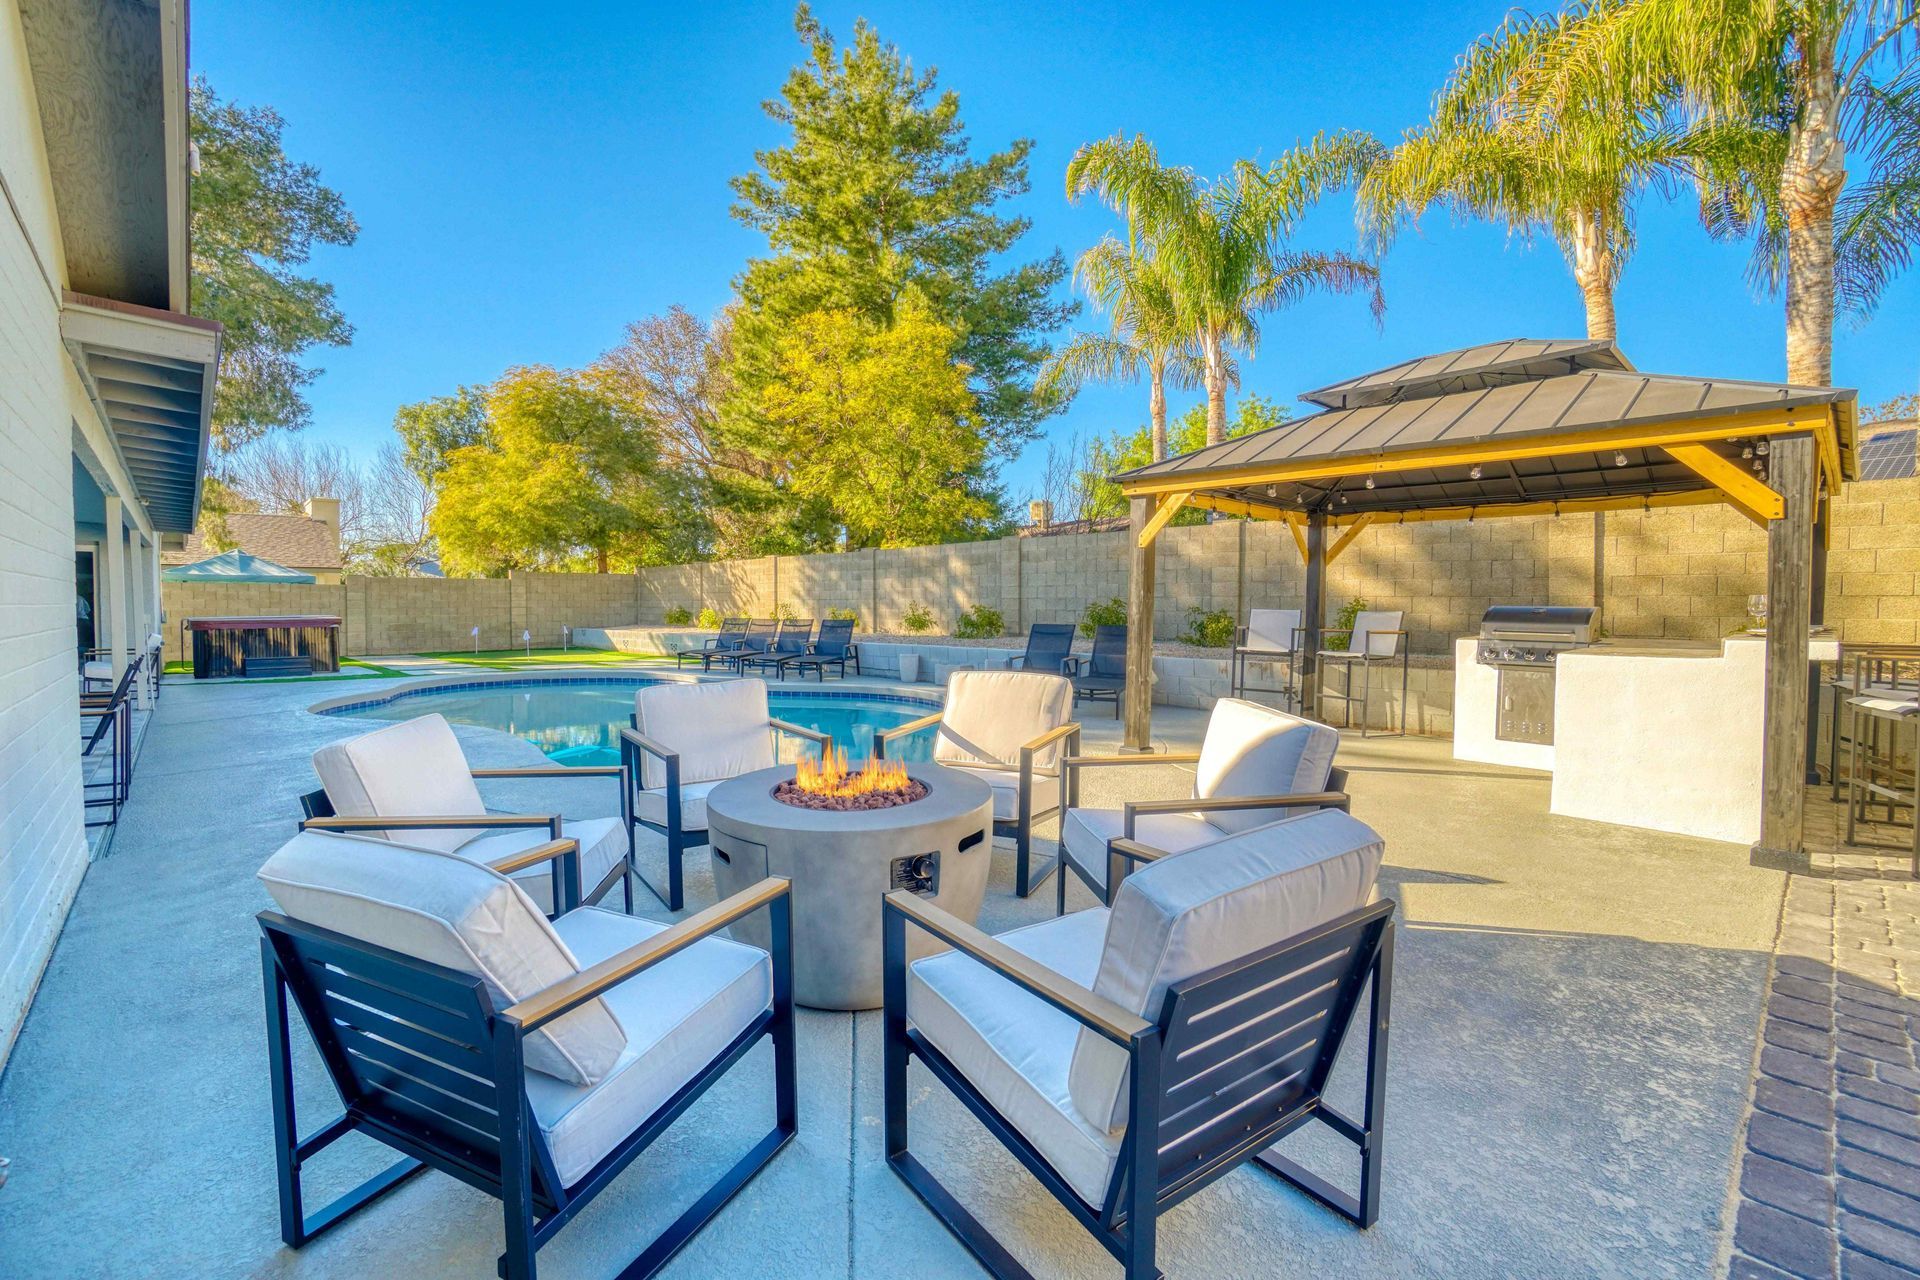 fully landscaped backyard with fire pit, gazebo, and garden design for outdoor living by affordable landscaping chandler